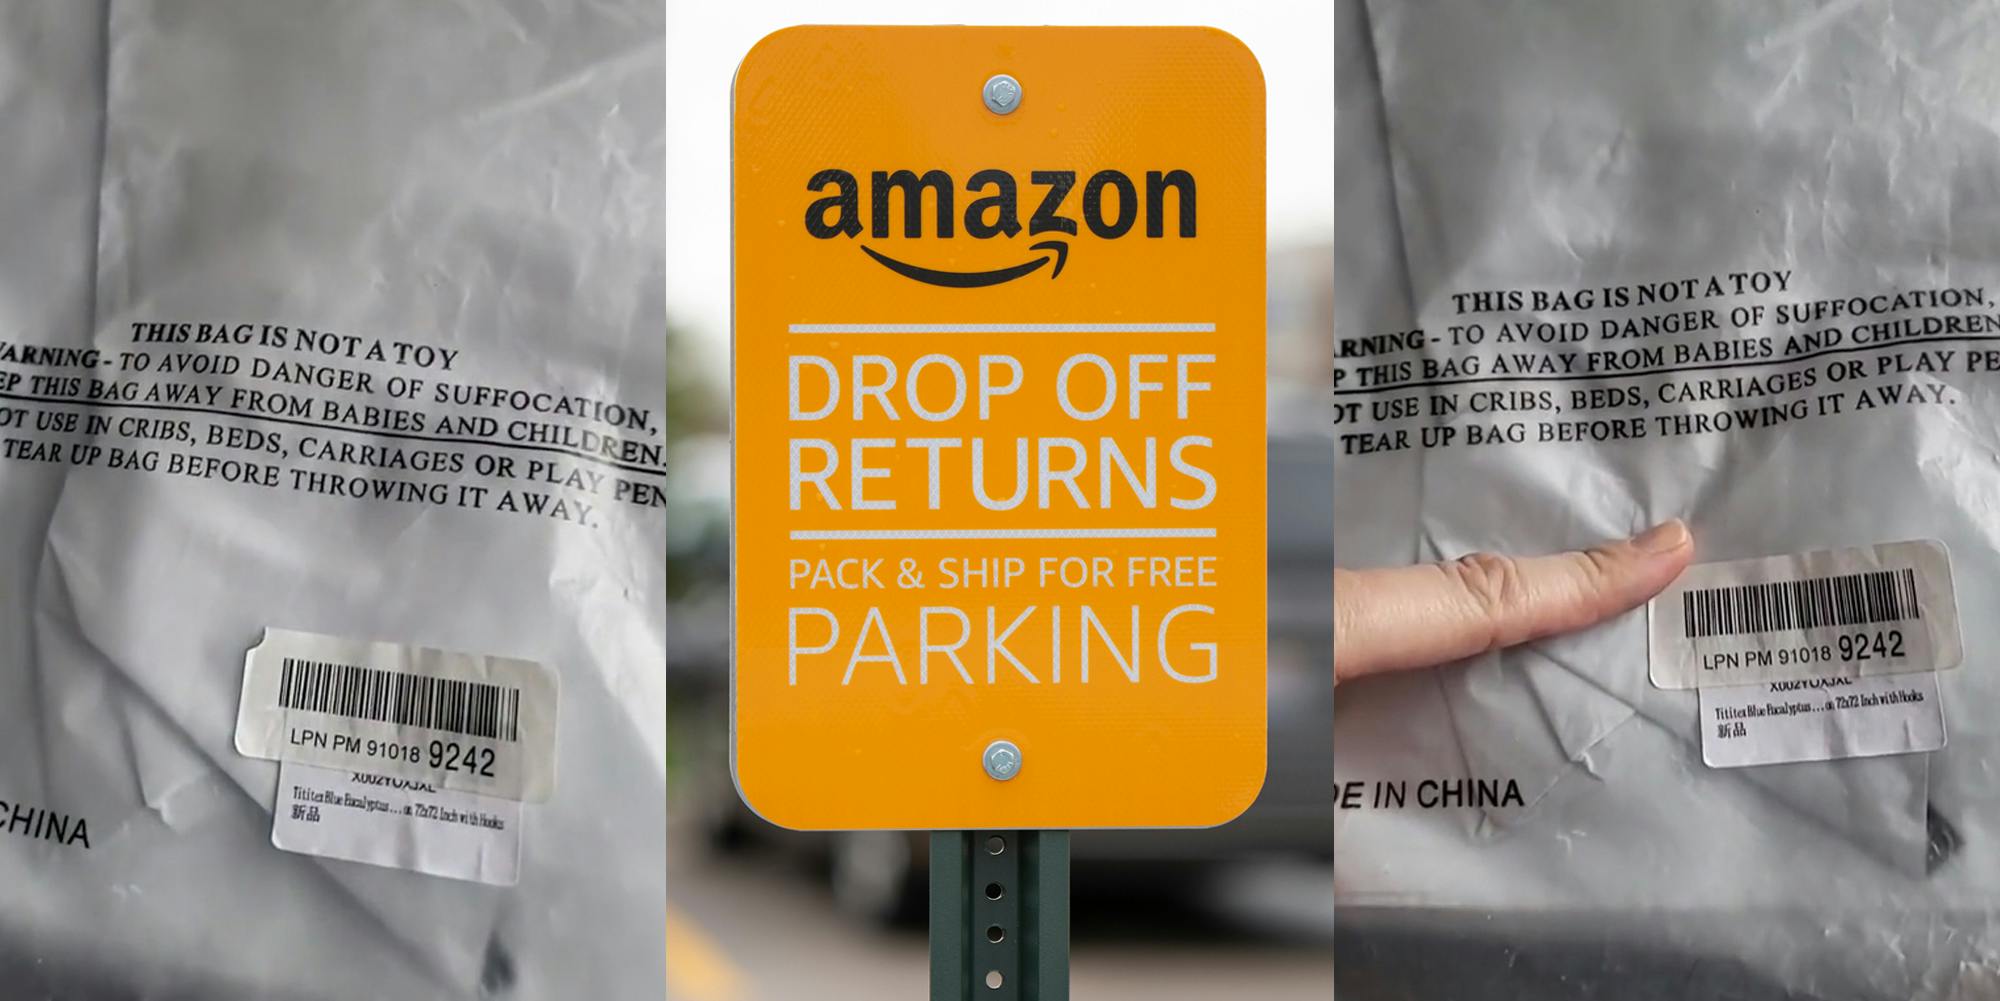 Amazon package with sticker on right corner (l) Amazon DROP OFF RETURNS" sign in parking lot (c) finger pointing to sticker on right side of Amazon package (r)